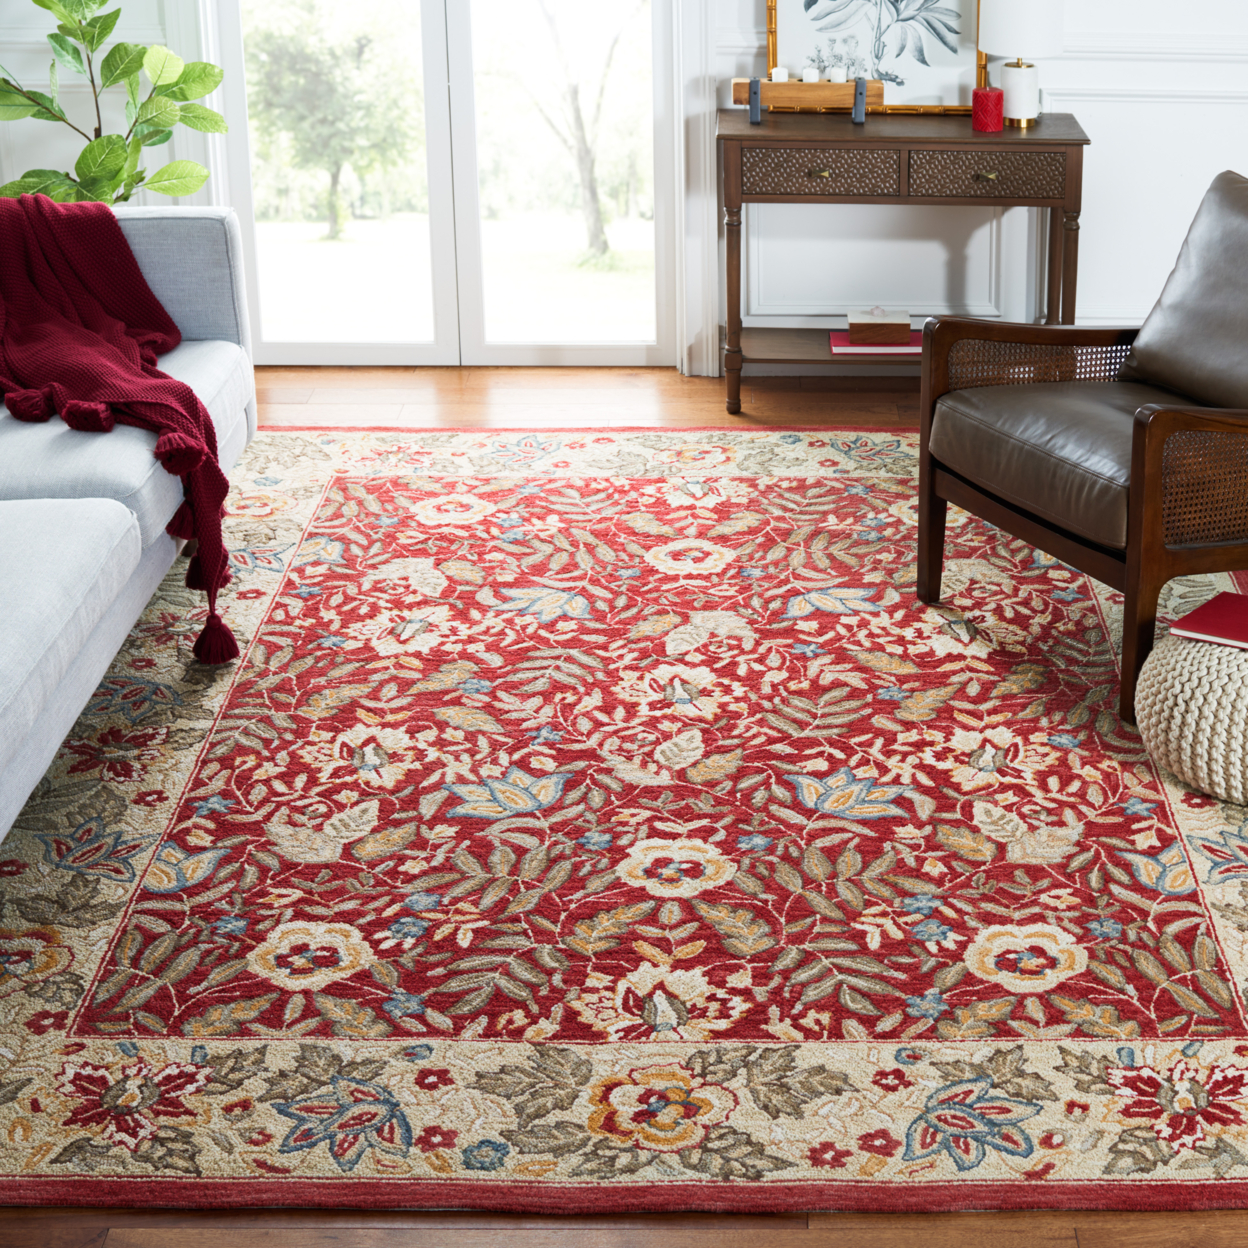 SAFAVIEH Chelsea HK140C Hand-hooked Red / Ivory Rug - 6' Square